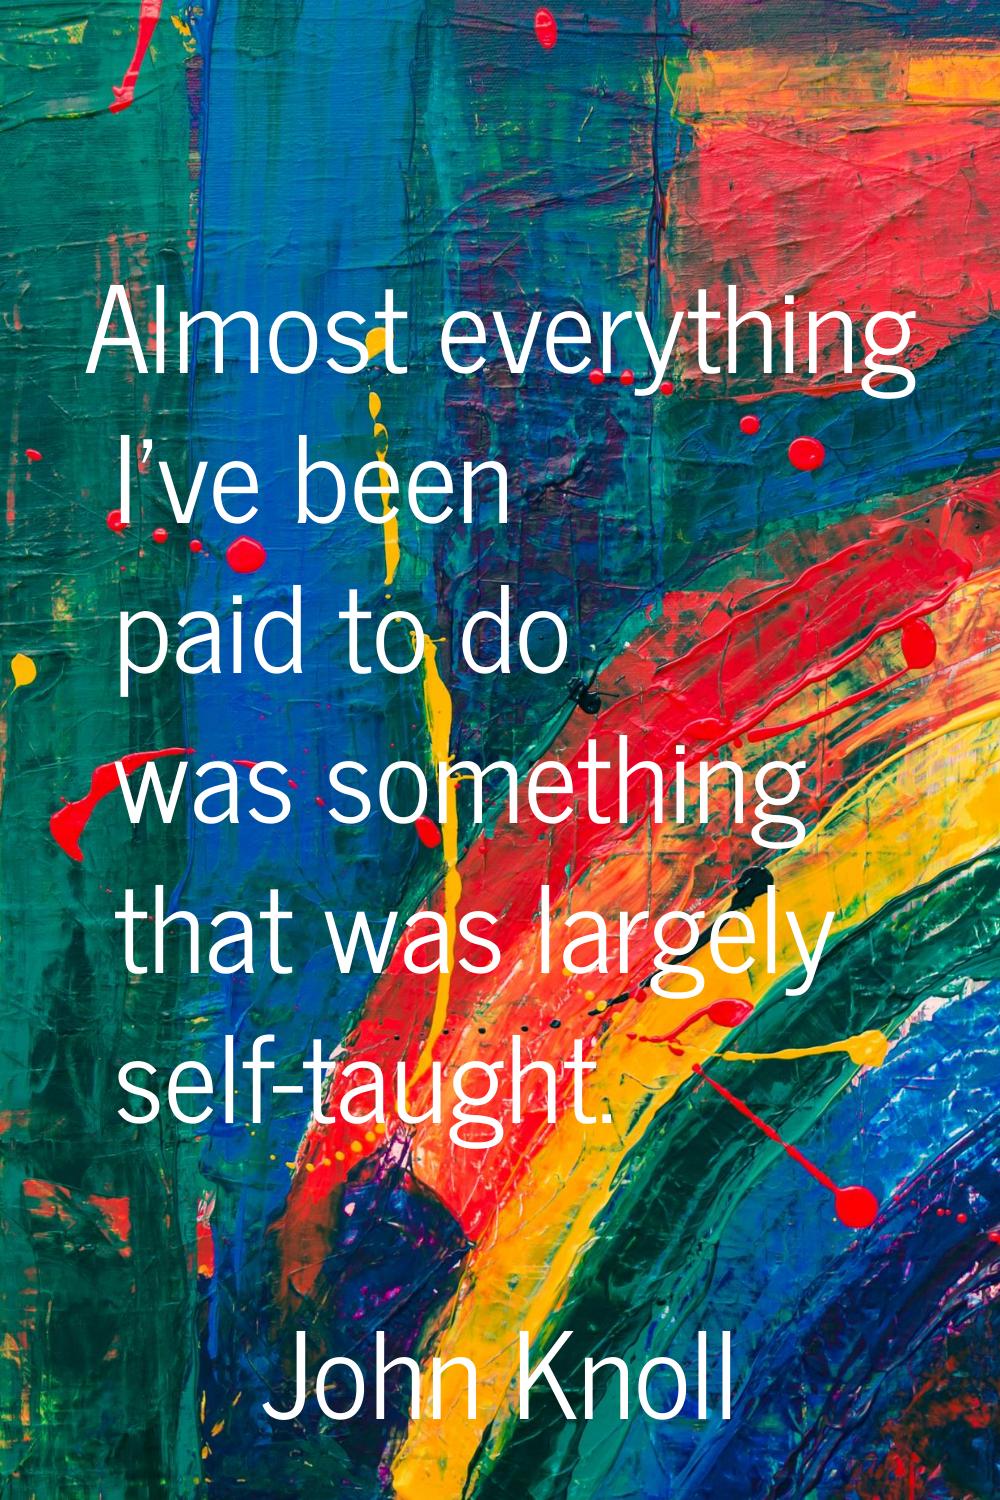 Almost everything I've been paid to do was something that was largely self-taught.